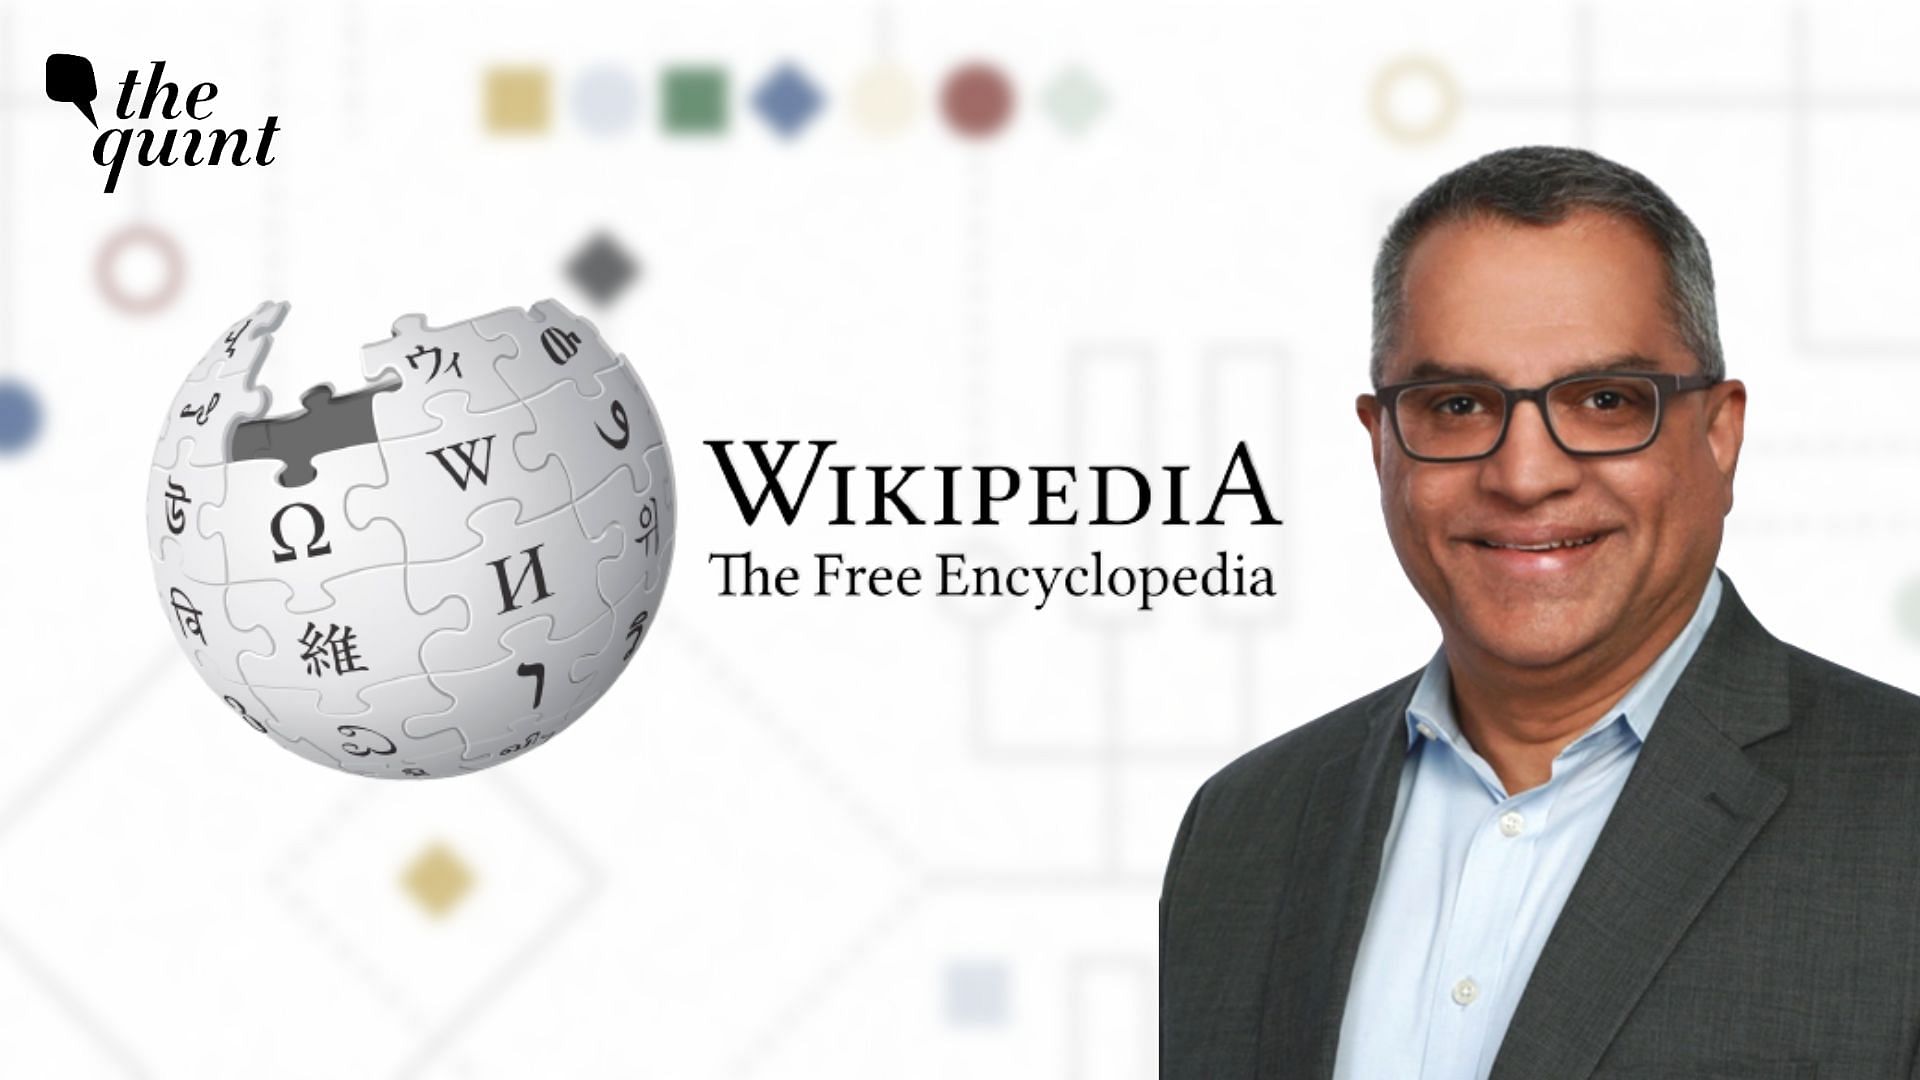 <div class="paragraphs"><p><strong>The Quint</strong> caught up with Raju Narisetti, veteran journalist and member of the Board of Trustees of the Wikimedia Foundation.</p></div>